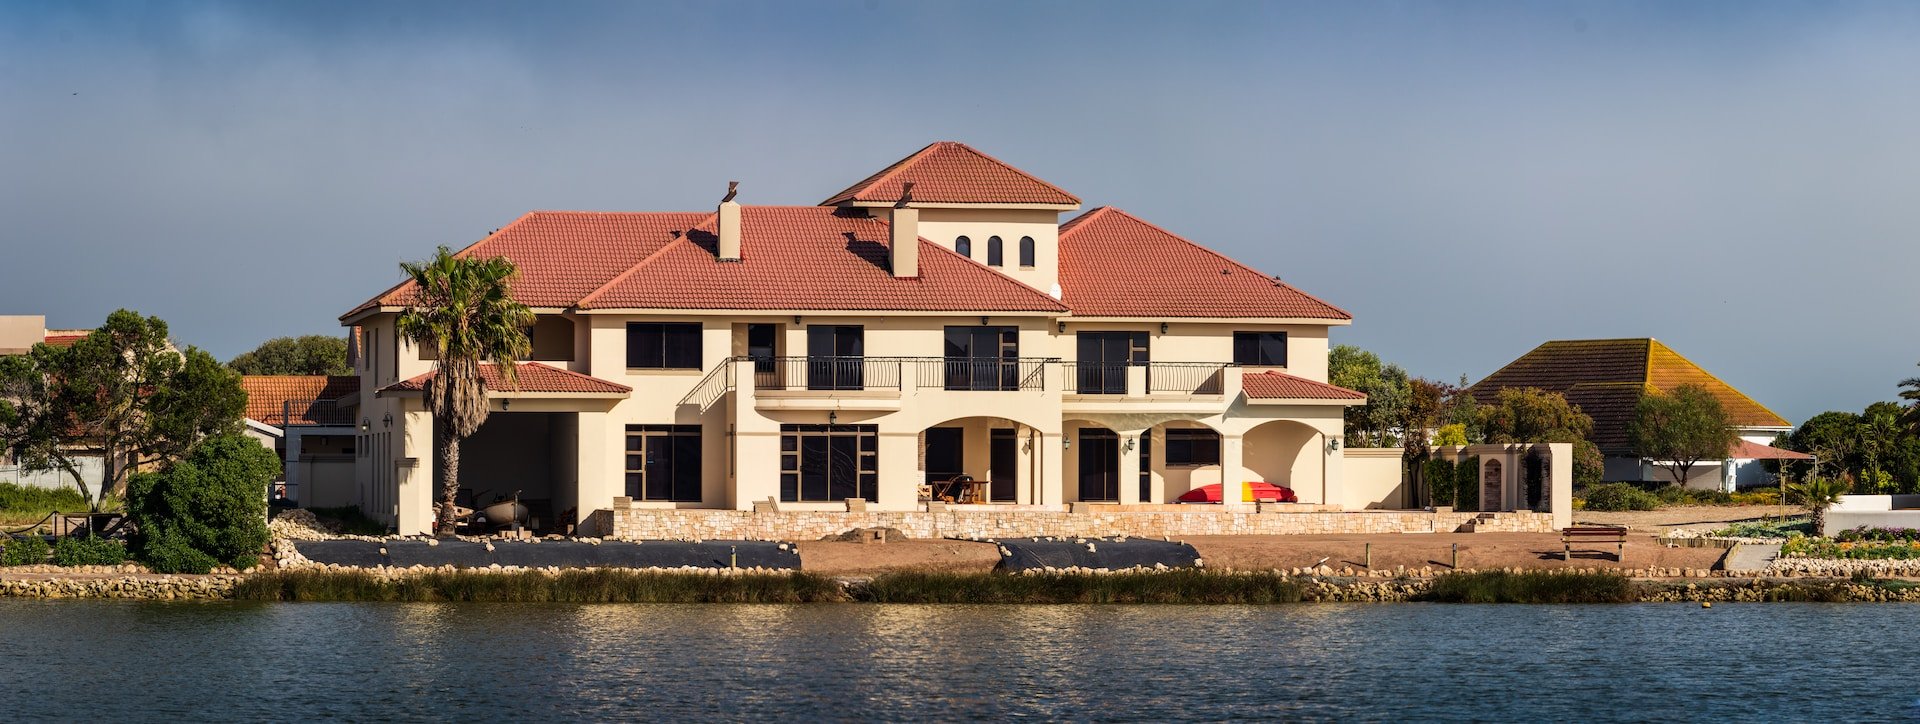 large waterfront home with clay tile roof